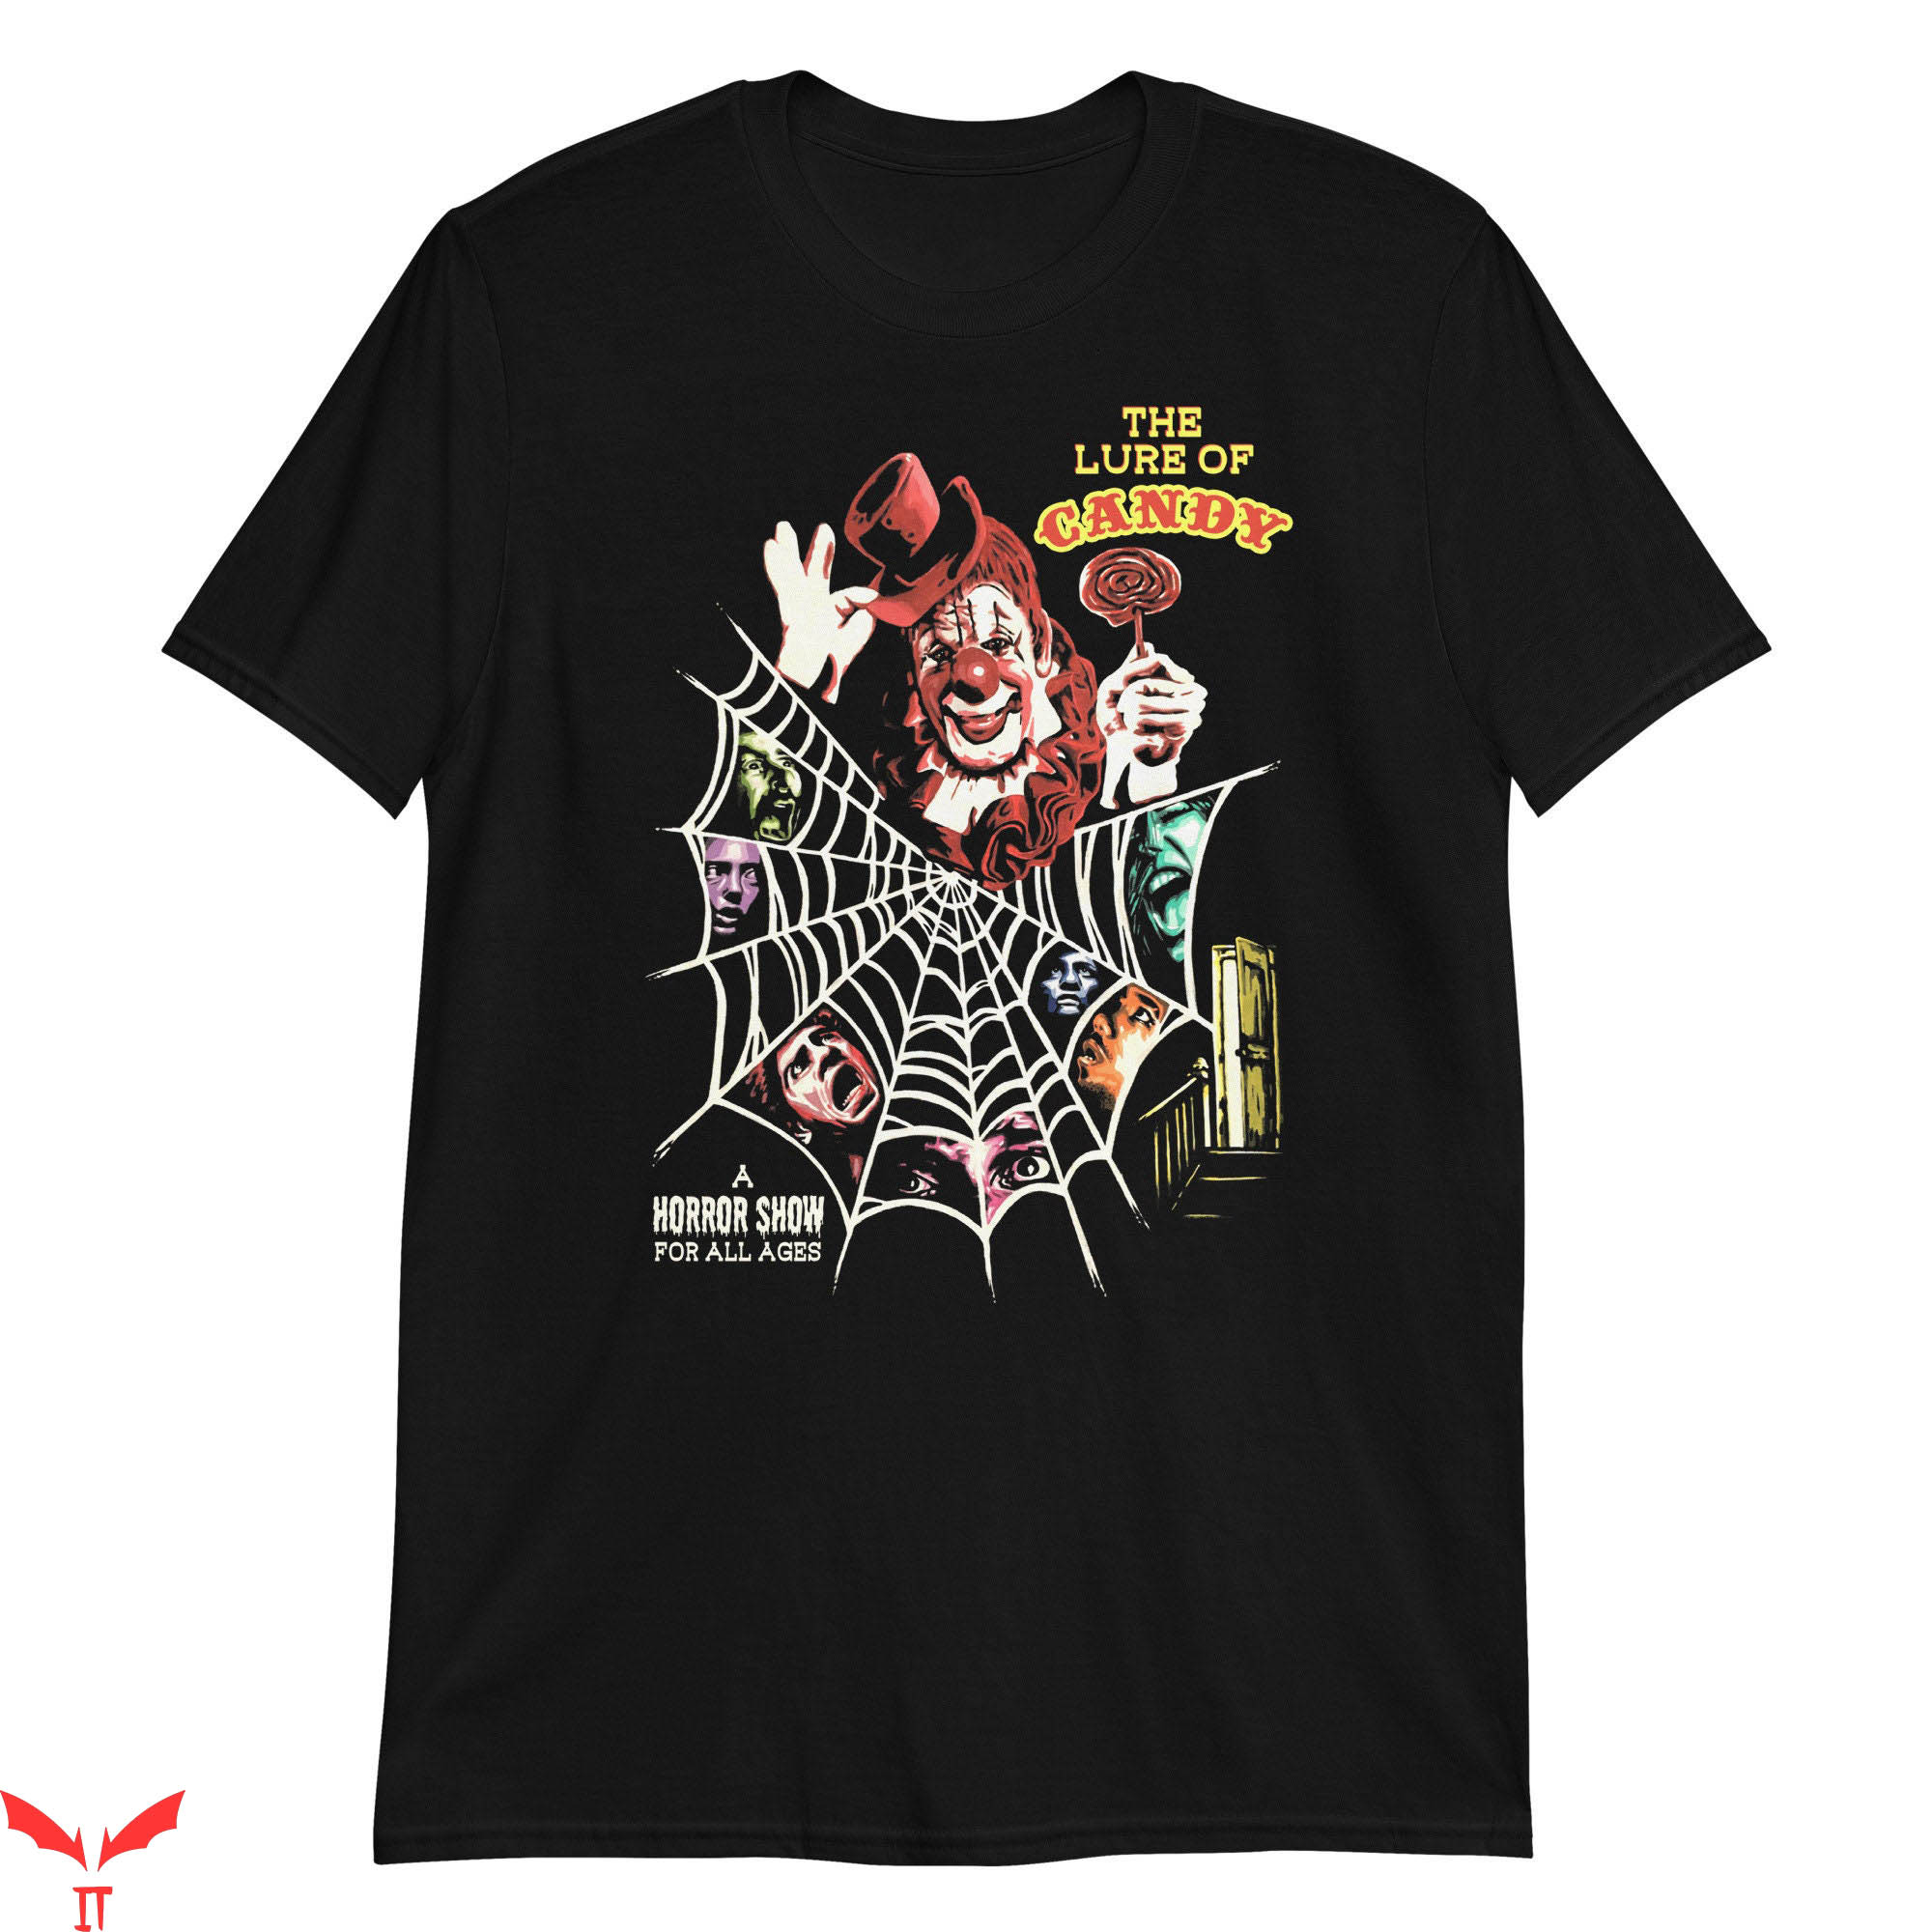 IT The Clown T-Shirt The Lure of Candy Original Scary Clown